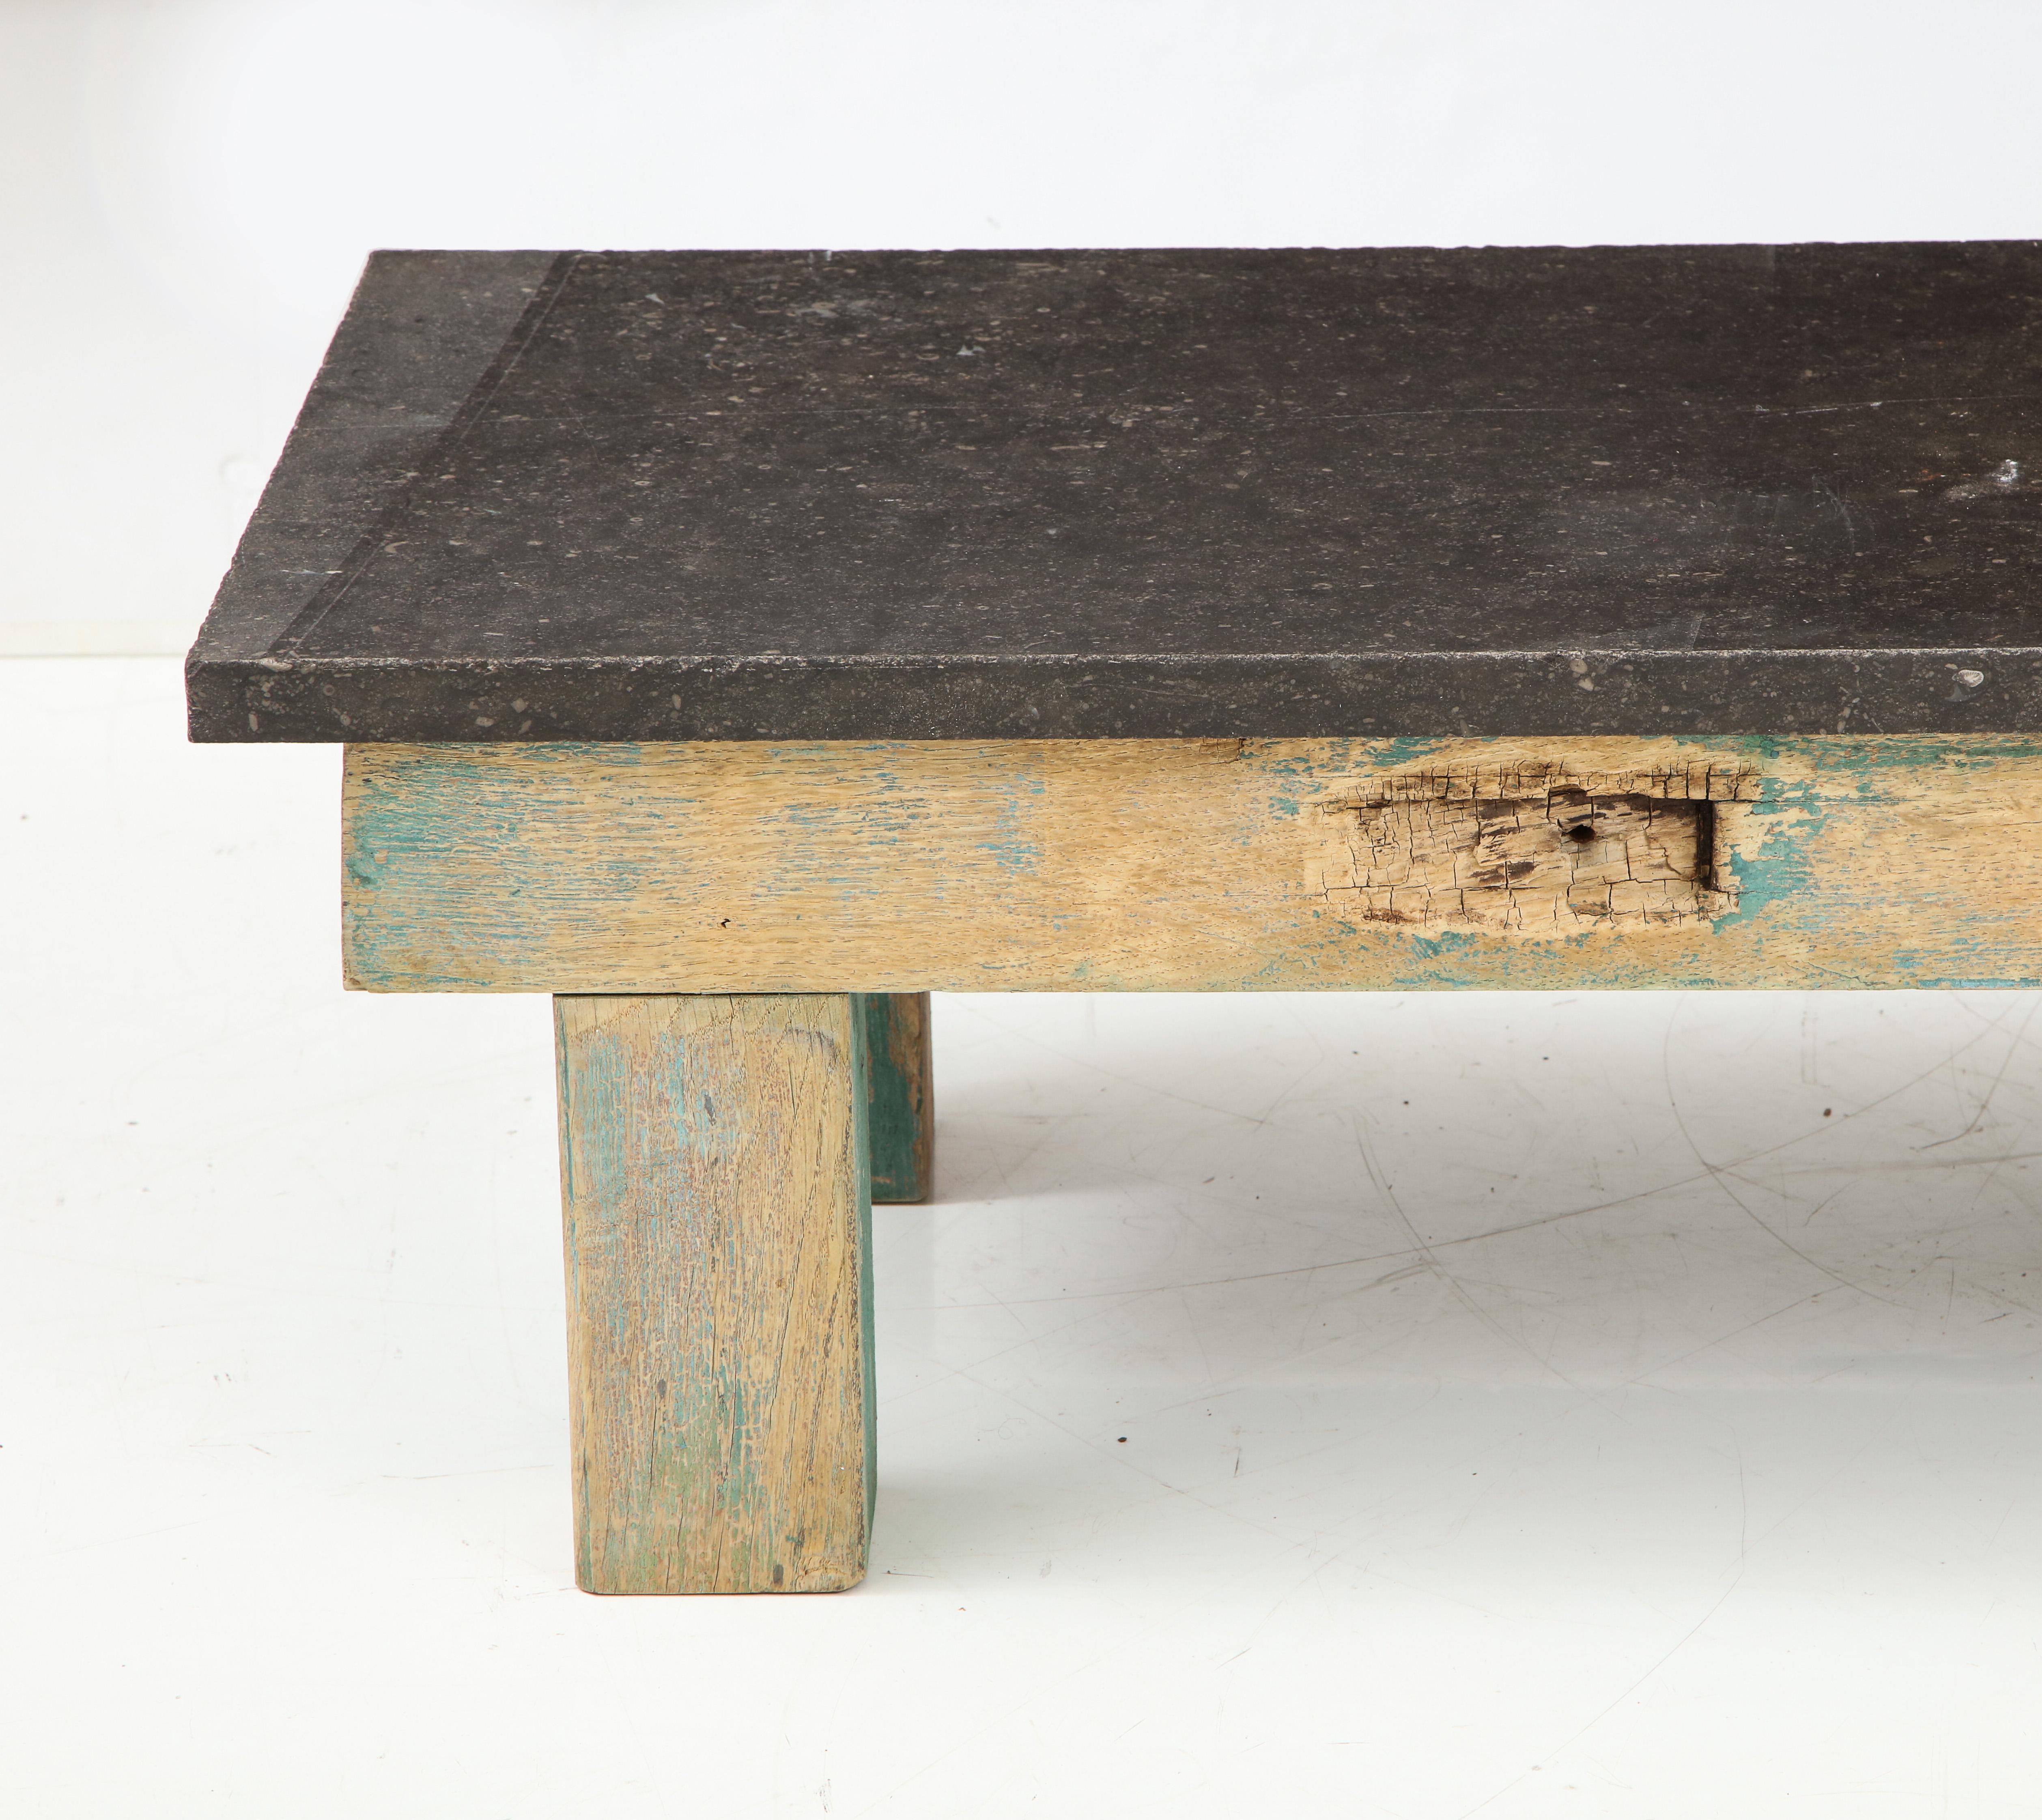 Belgian bluestone and oak worktable base table
Primitive, Japanese Aesthetic
French, circa 1900

Fantastic very long coffee table or low console.